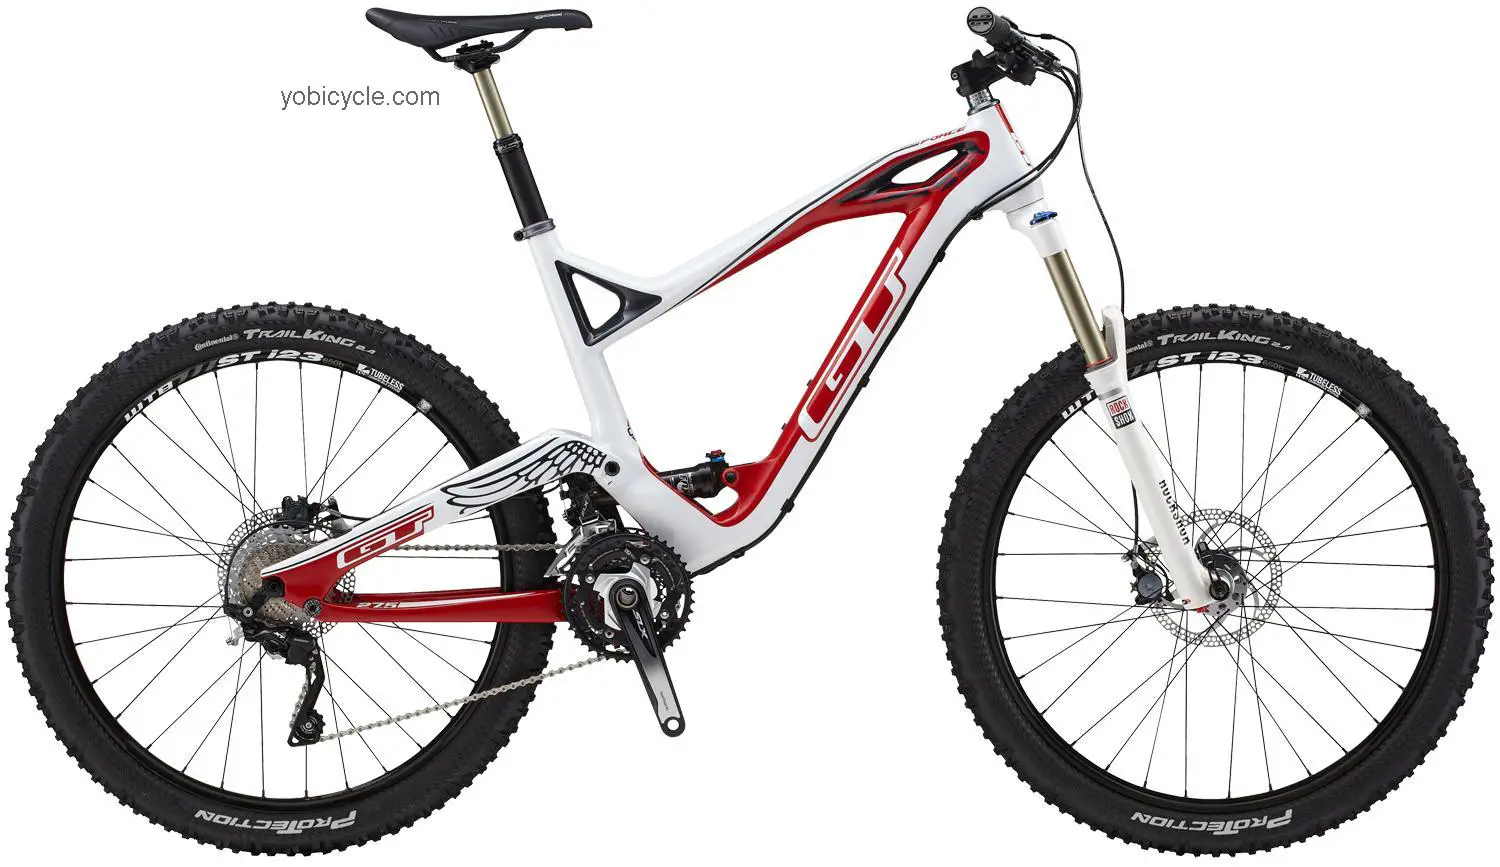 GT Force Carbon Expert competitors and comparison tool online specs and performance